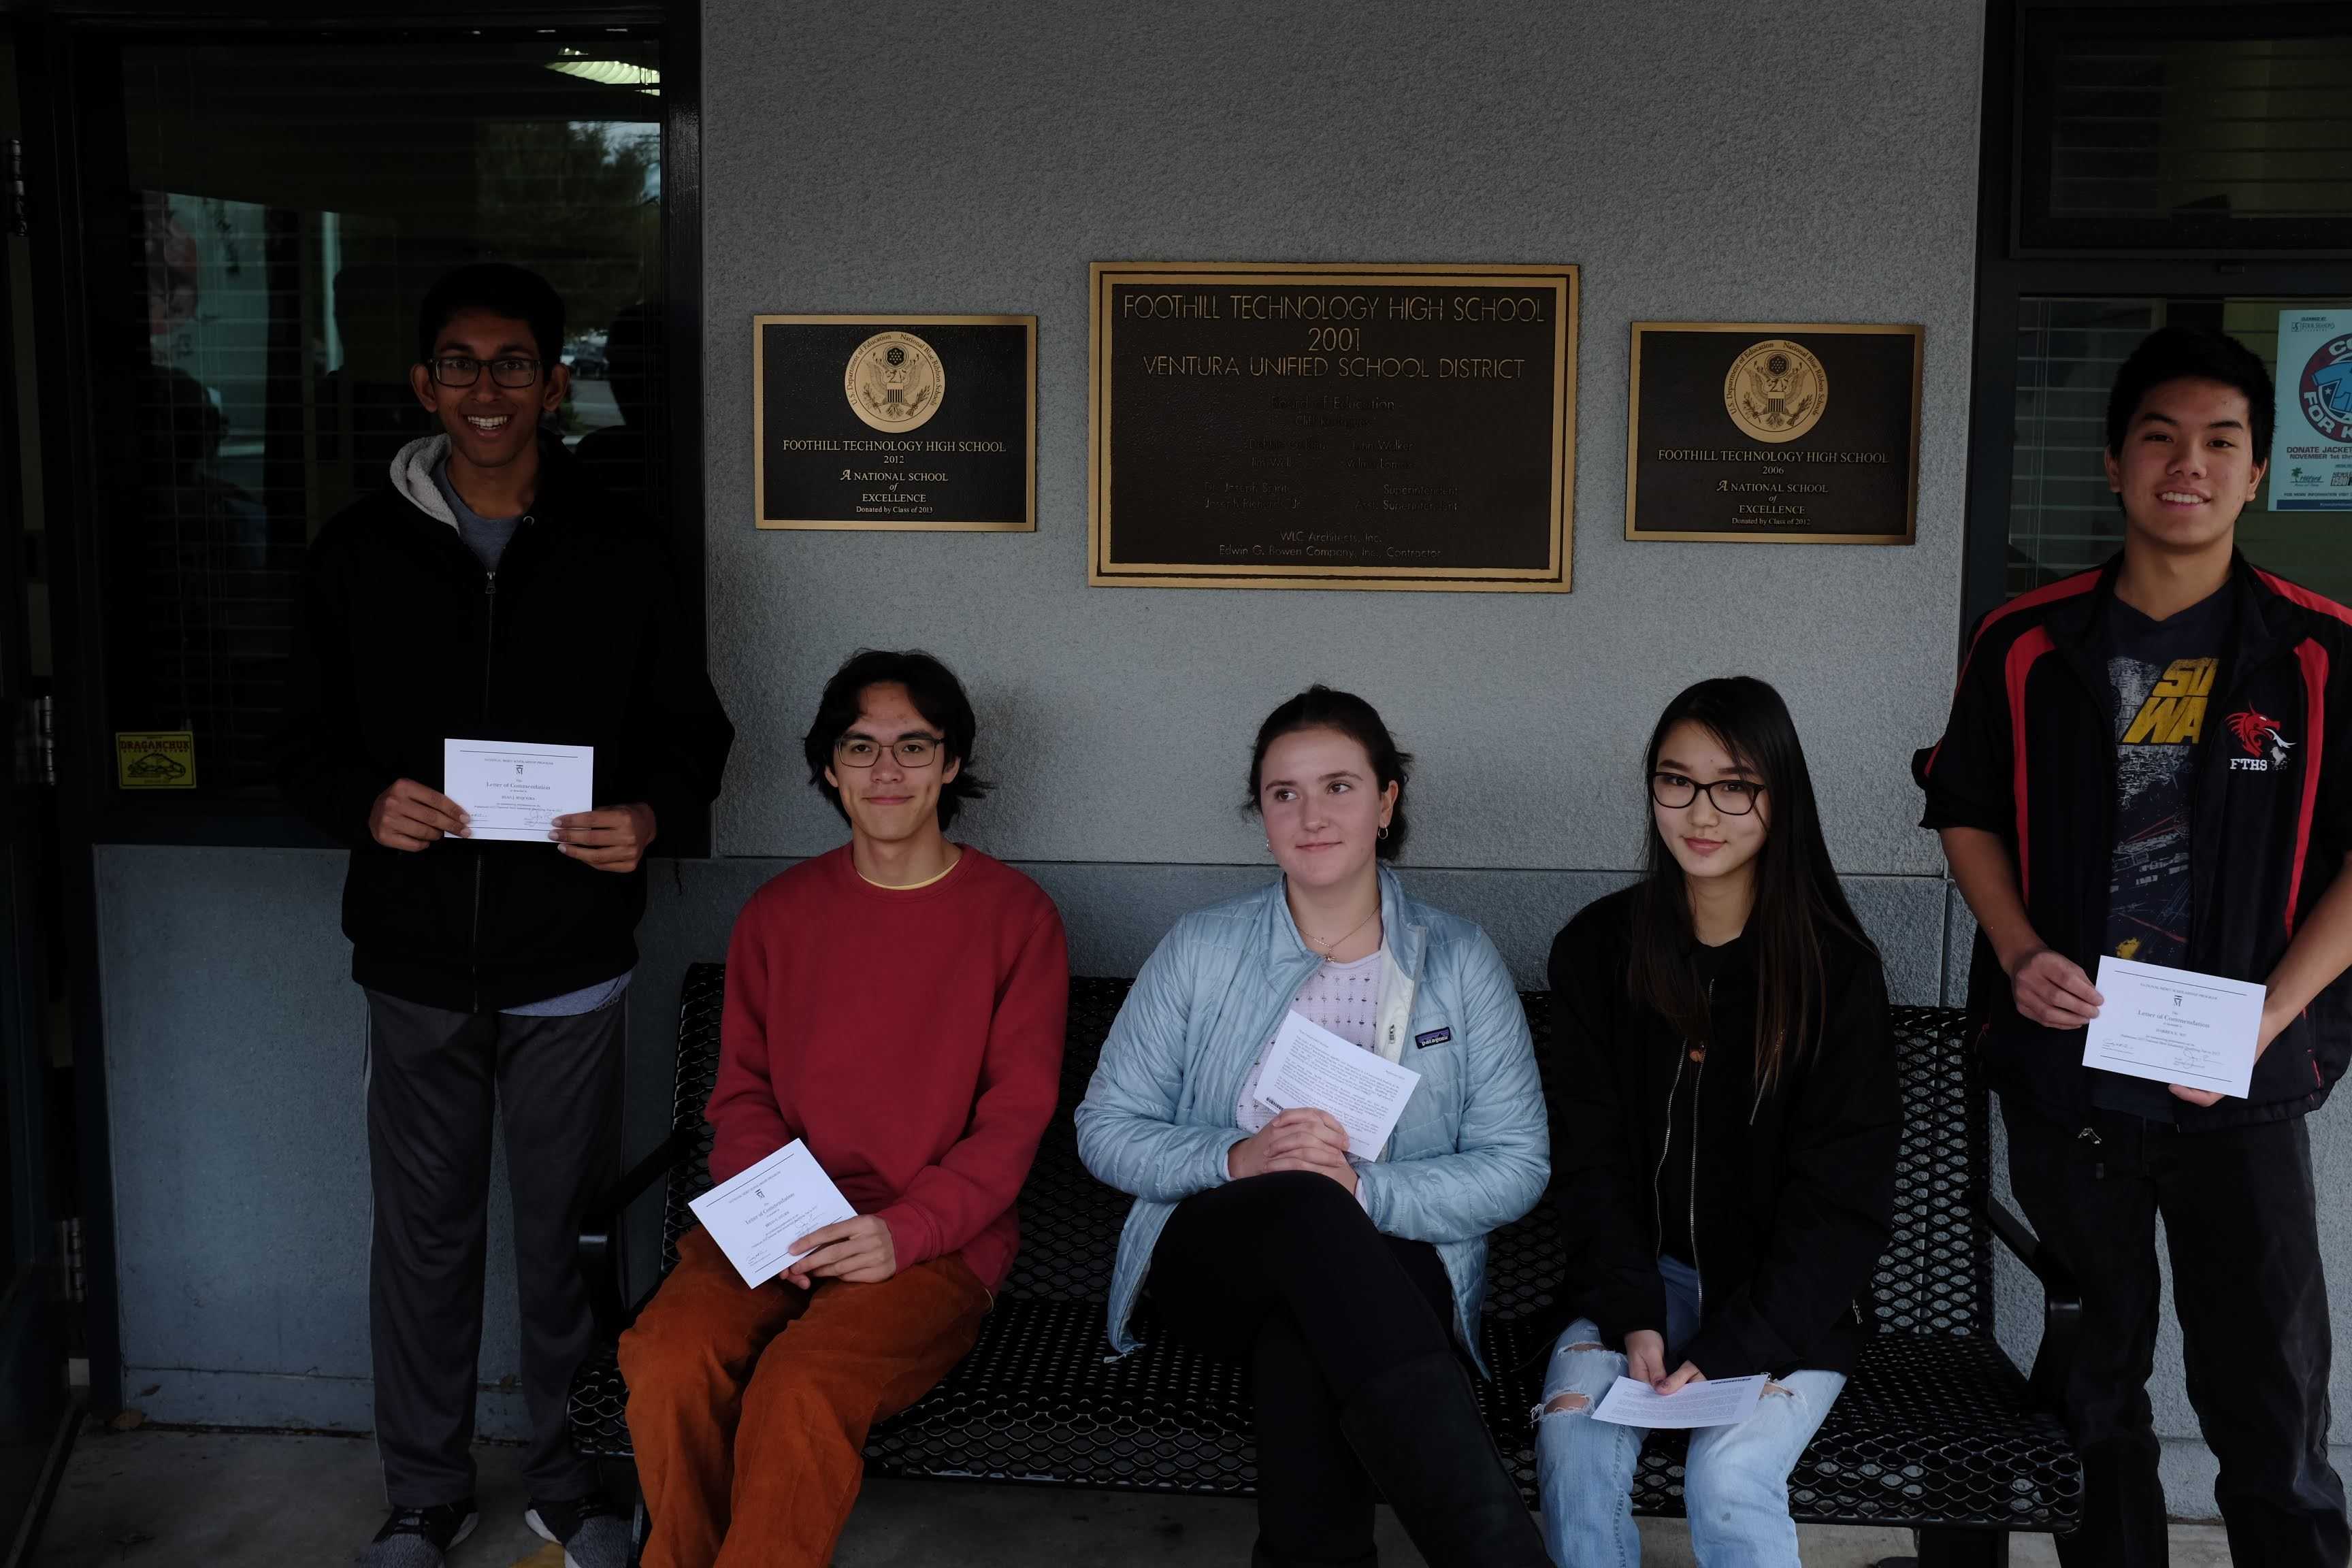 The commendees smile with their certificates. Credit: Ethan Crouch / The Foothill Dragon Press